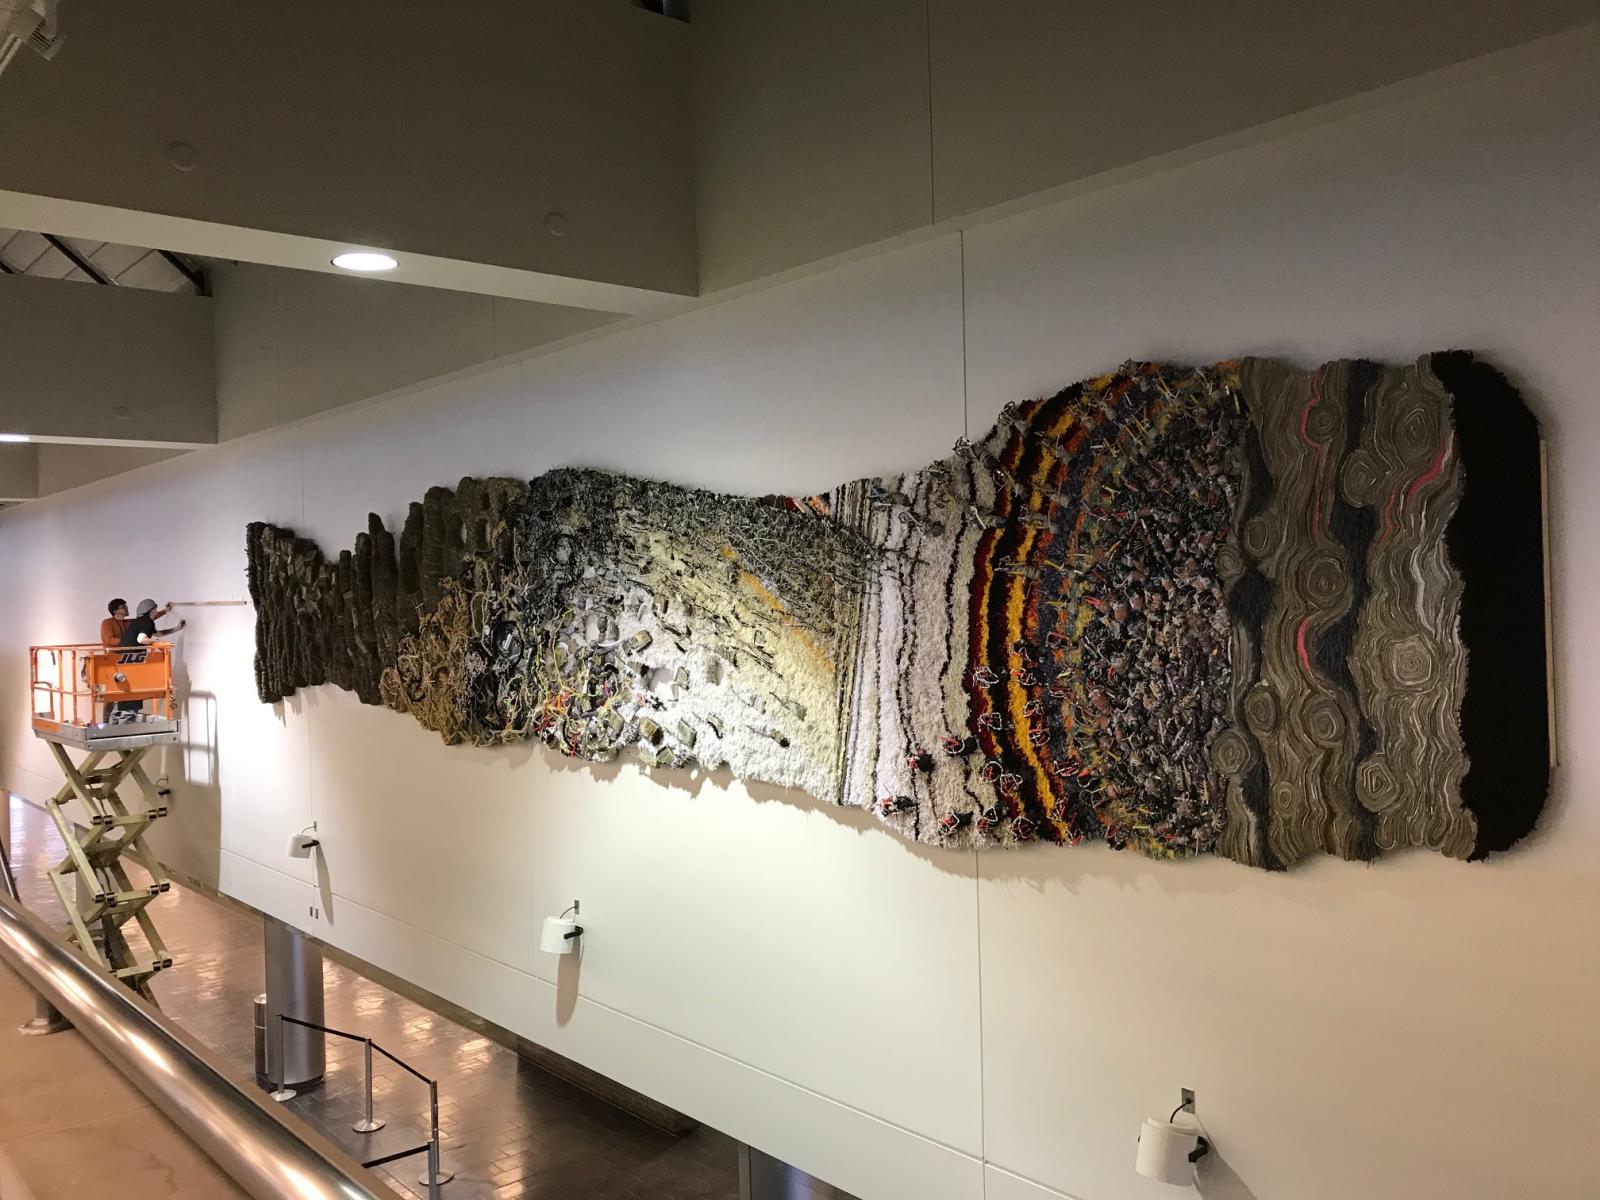 Installation of "Biography" at Albany International Airport